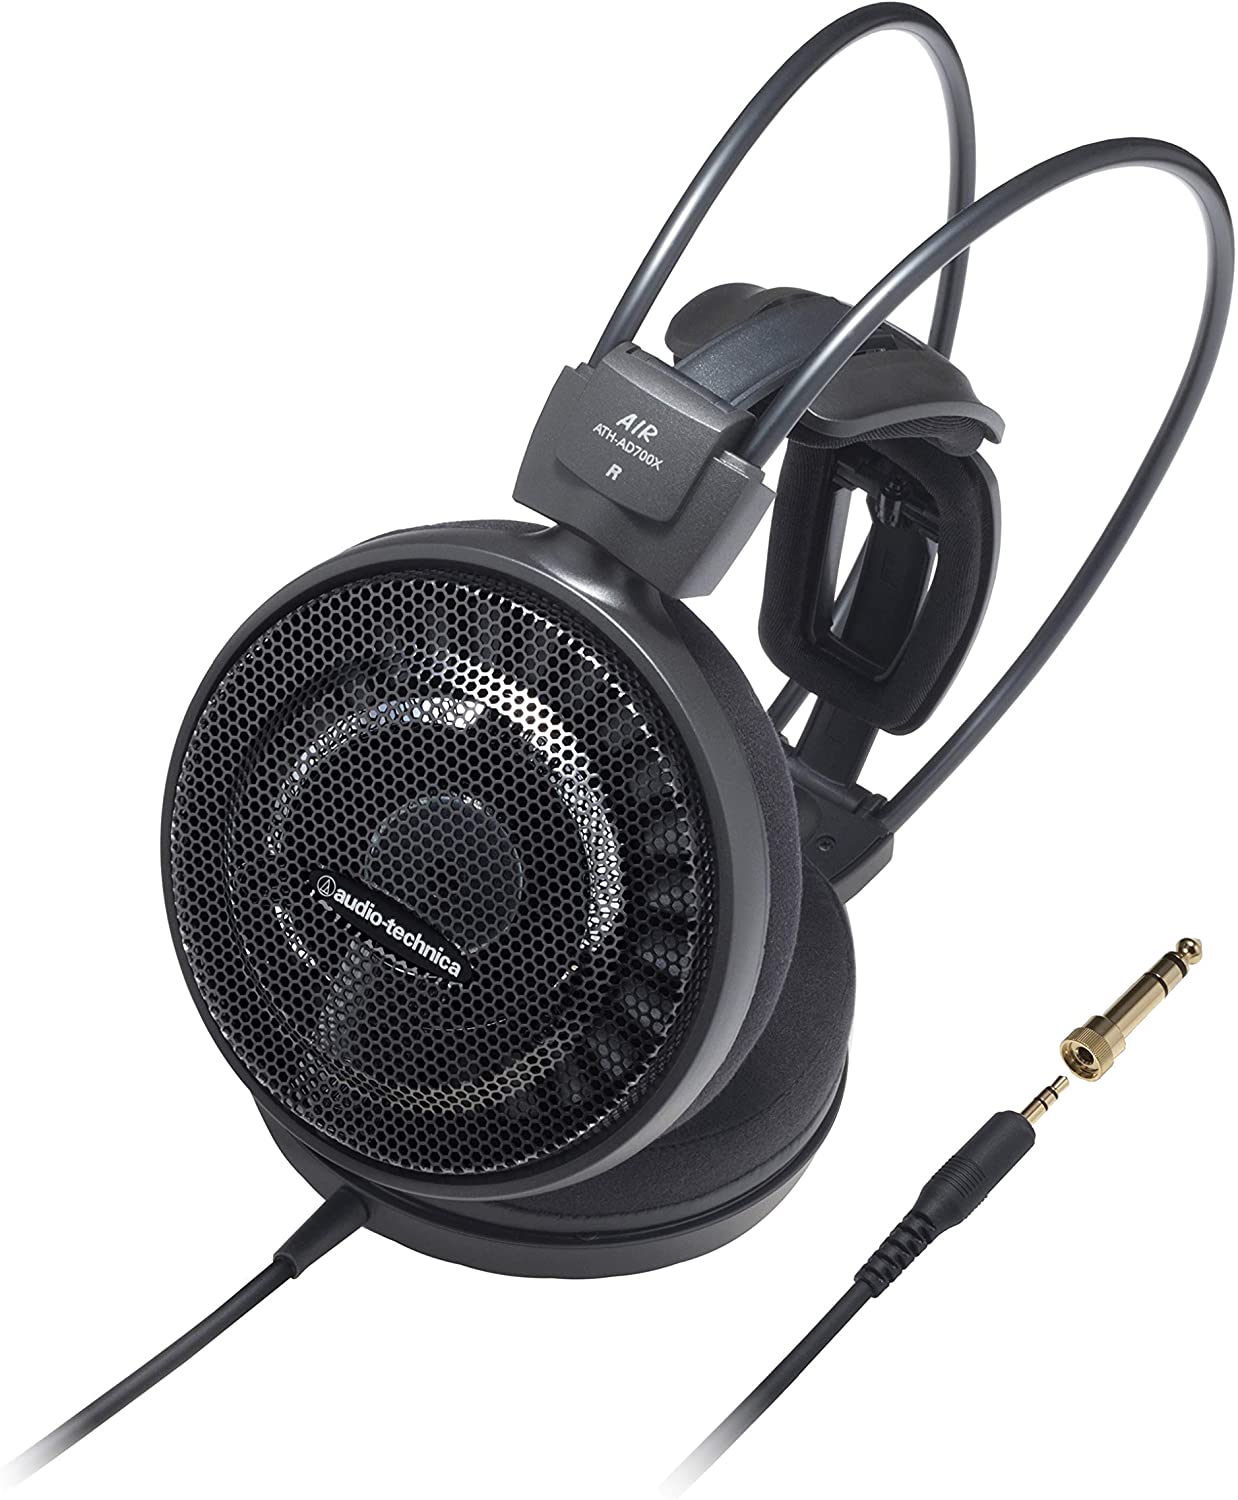 Audio-Technica ATH-AD700X-RB Audiophile Open-Air Headphones - Refurbished